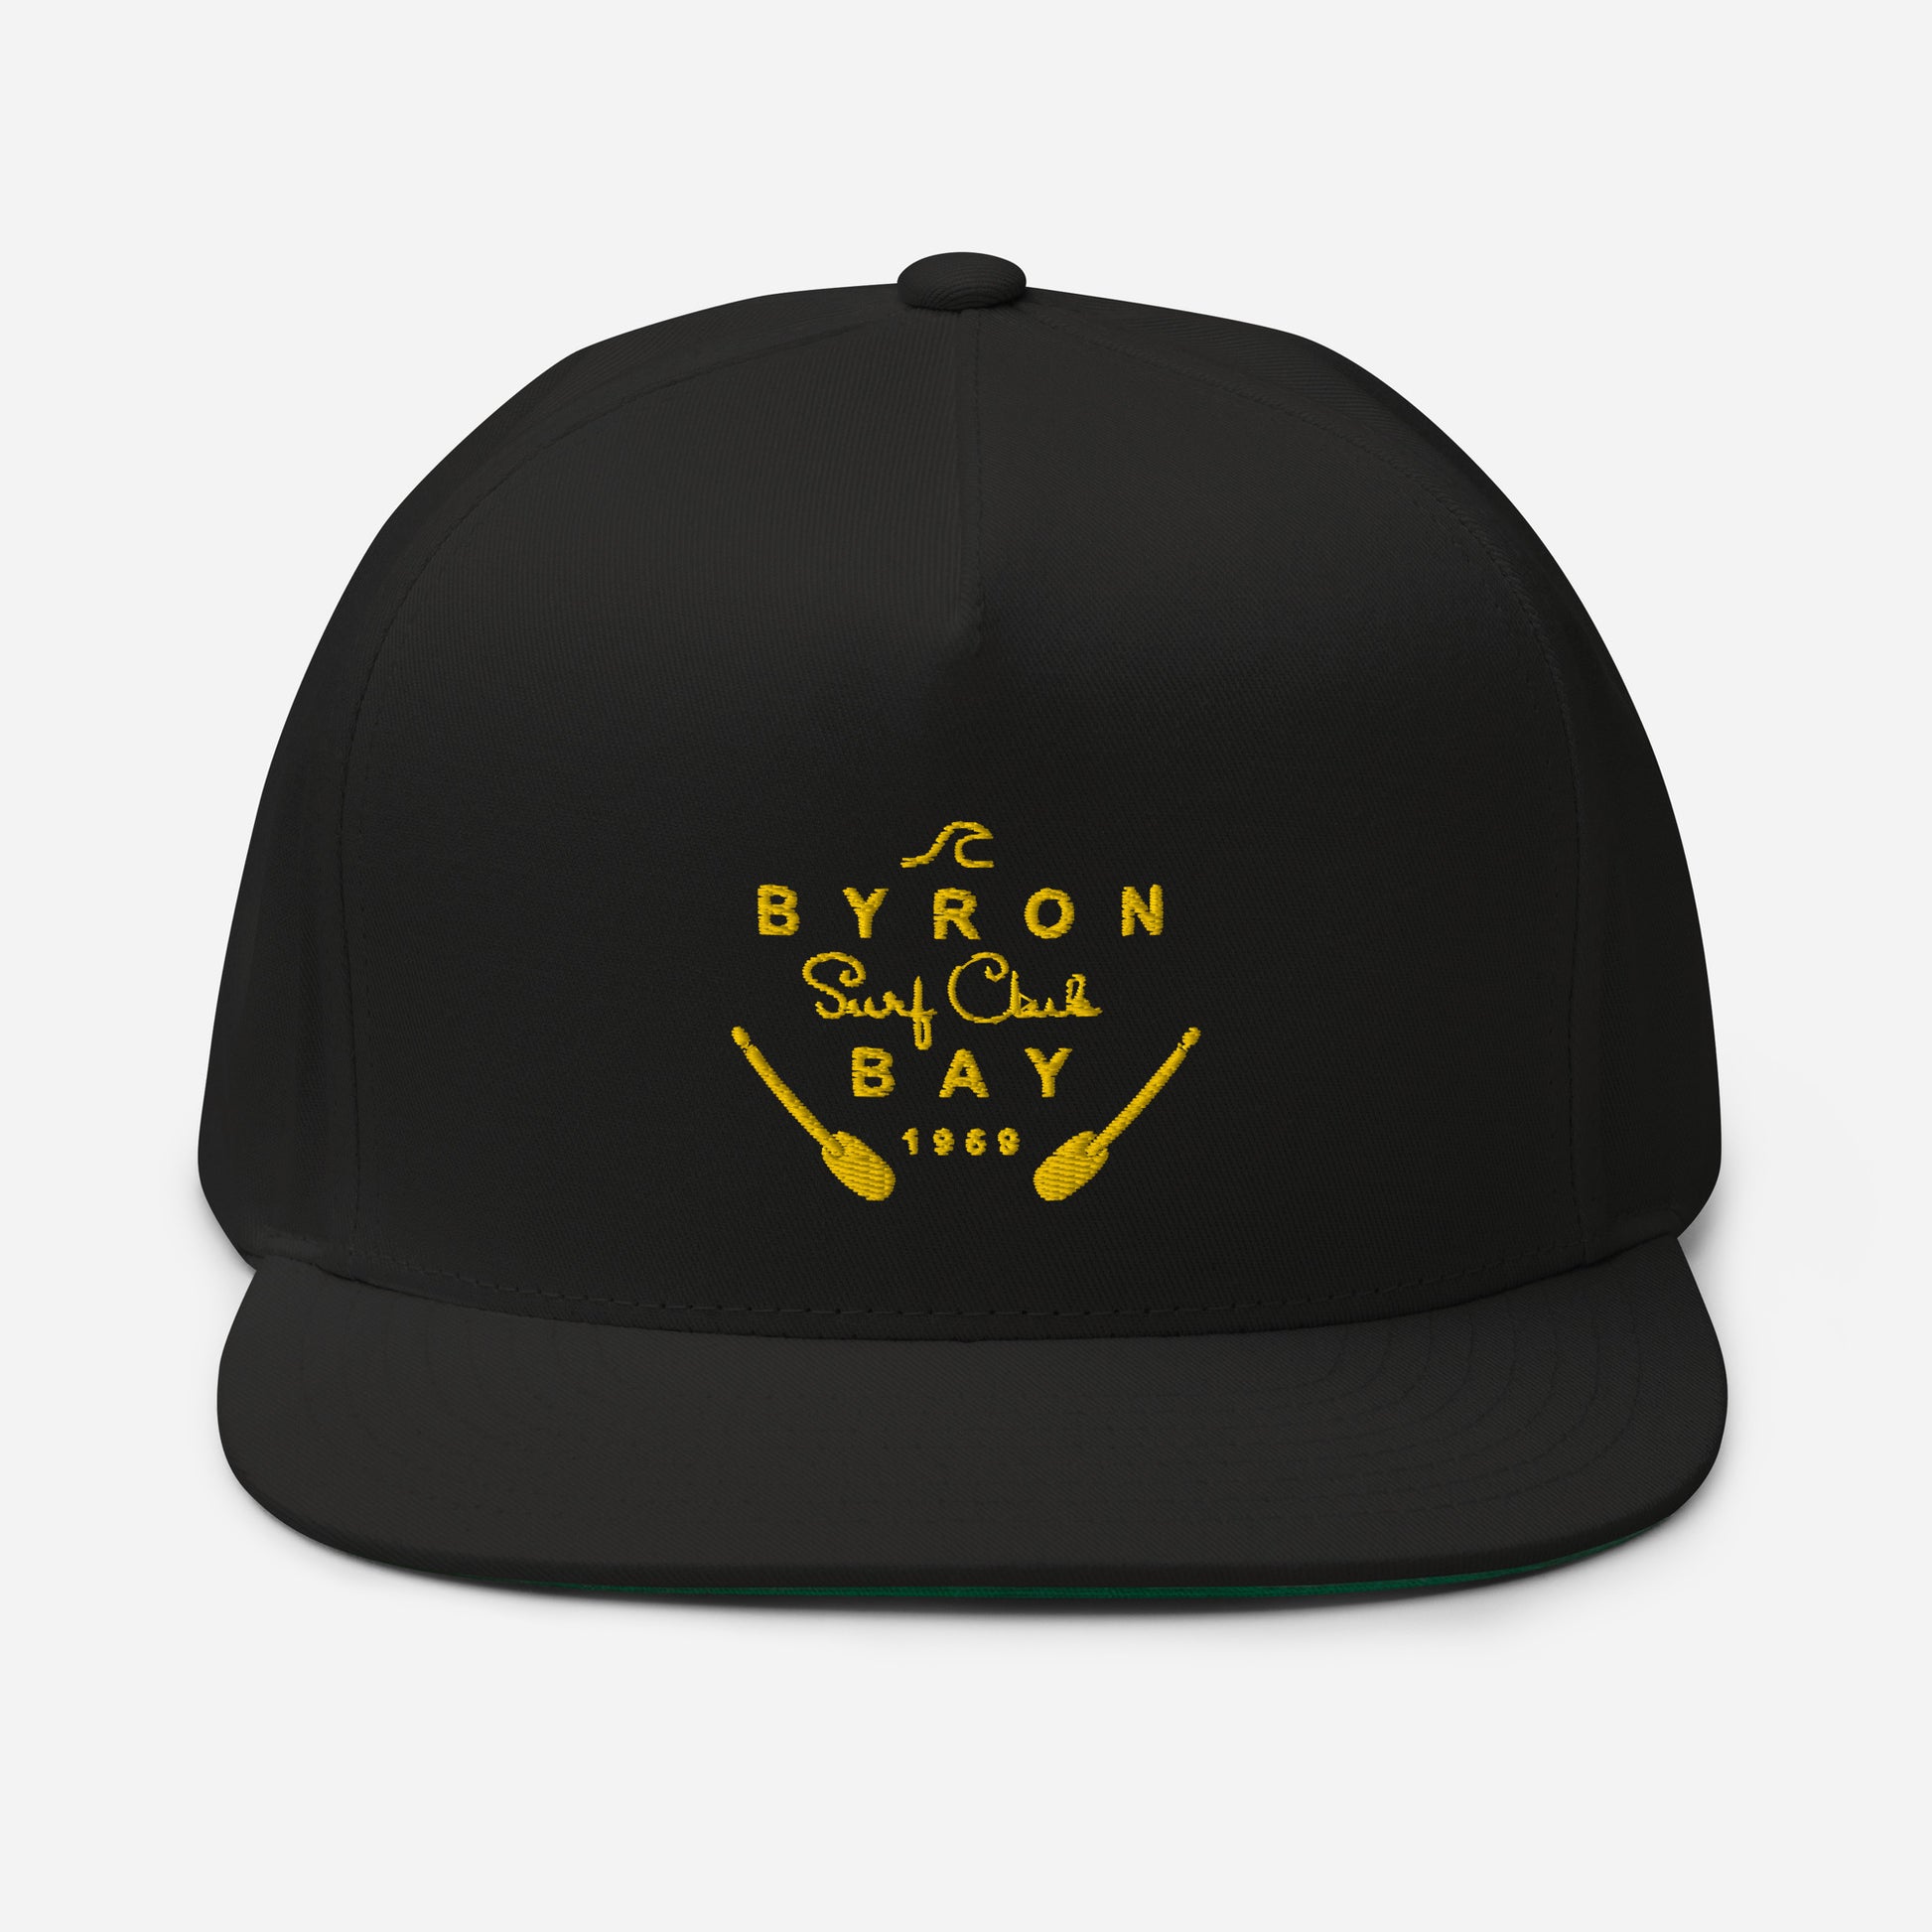  Flat Bill Cap - Black - Front view - With yellow Byron Bay Surf Club logo on front - Genuine Byron Bay Merchandise | Produced by Go Sea Kayak Byron Bay 